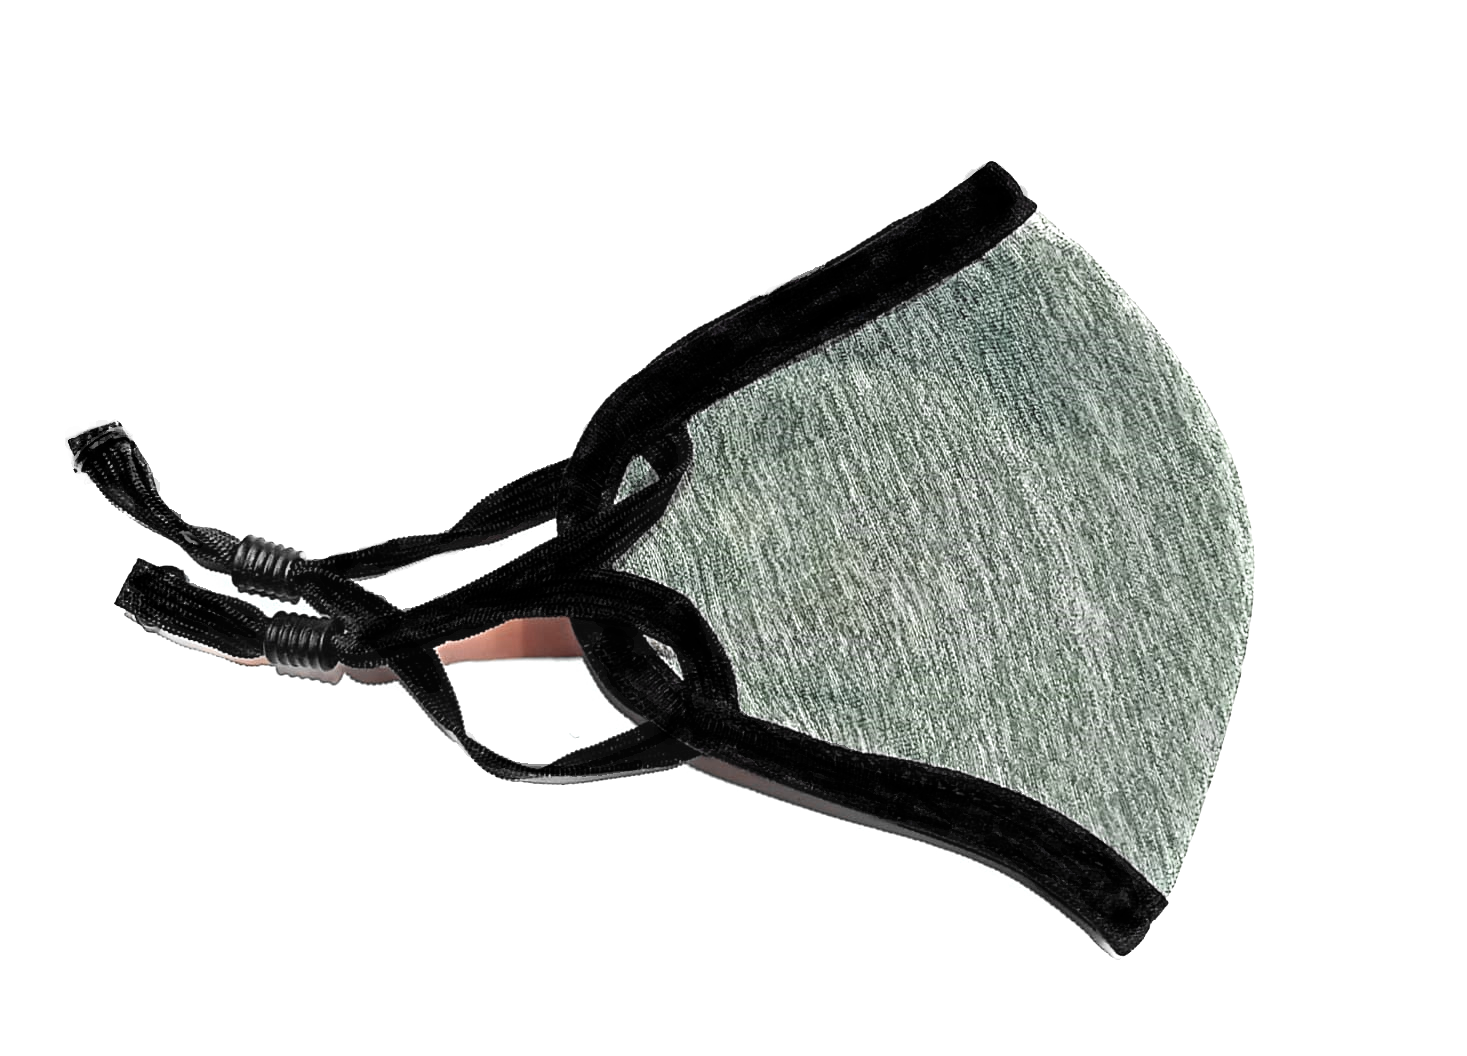 IT IS A NON-MEDICAL MASK.COTTON FACE MASK MADE UP OF 2 LAYERS. MADE UP OF 100% COTTON. SUITABLE FOR SENSITIVE SKIN. INNOVATIVE DESIGN TO REDUCE THE EYEWEAR FOGGING. BREATHABLE HYDROPHOBIC POLY FABRIC FOR PARTICLE FILTRATION. ELASTIC ADJUSTOR FOR MAXIMUM COMFORT. SOFT AND DURABLE ELASTIC. BREATHABLE 100% COTTON MEDICAL GRADE HYDROPHILIC FABRIC FOR COMFORT. 2 LAYERS EFFECTIVE PARTICLE FILTRATION SYSTEM.